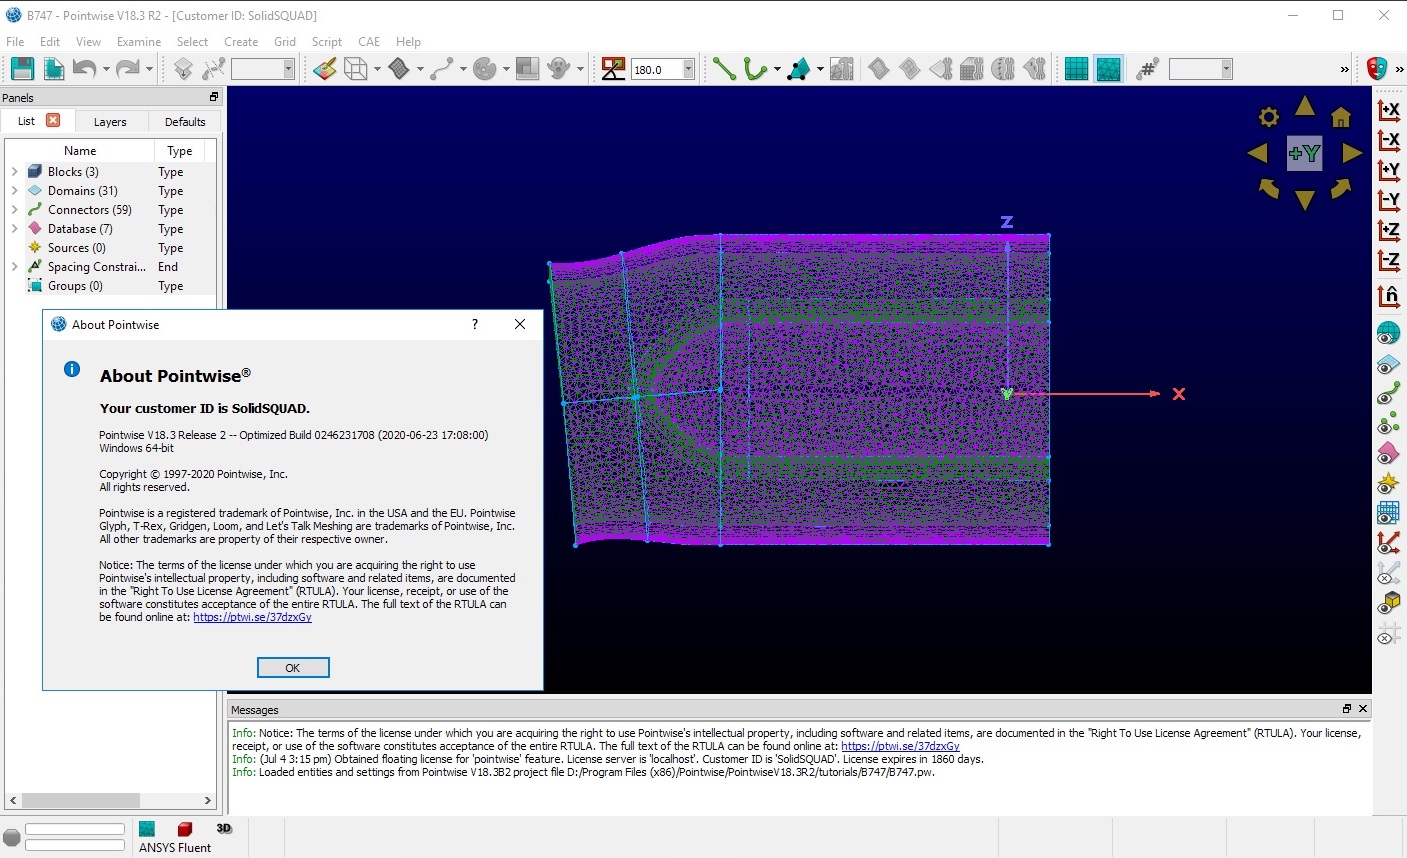 Working with PointWise 18.3 R2 build 2020-06-23 full license